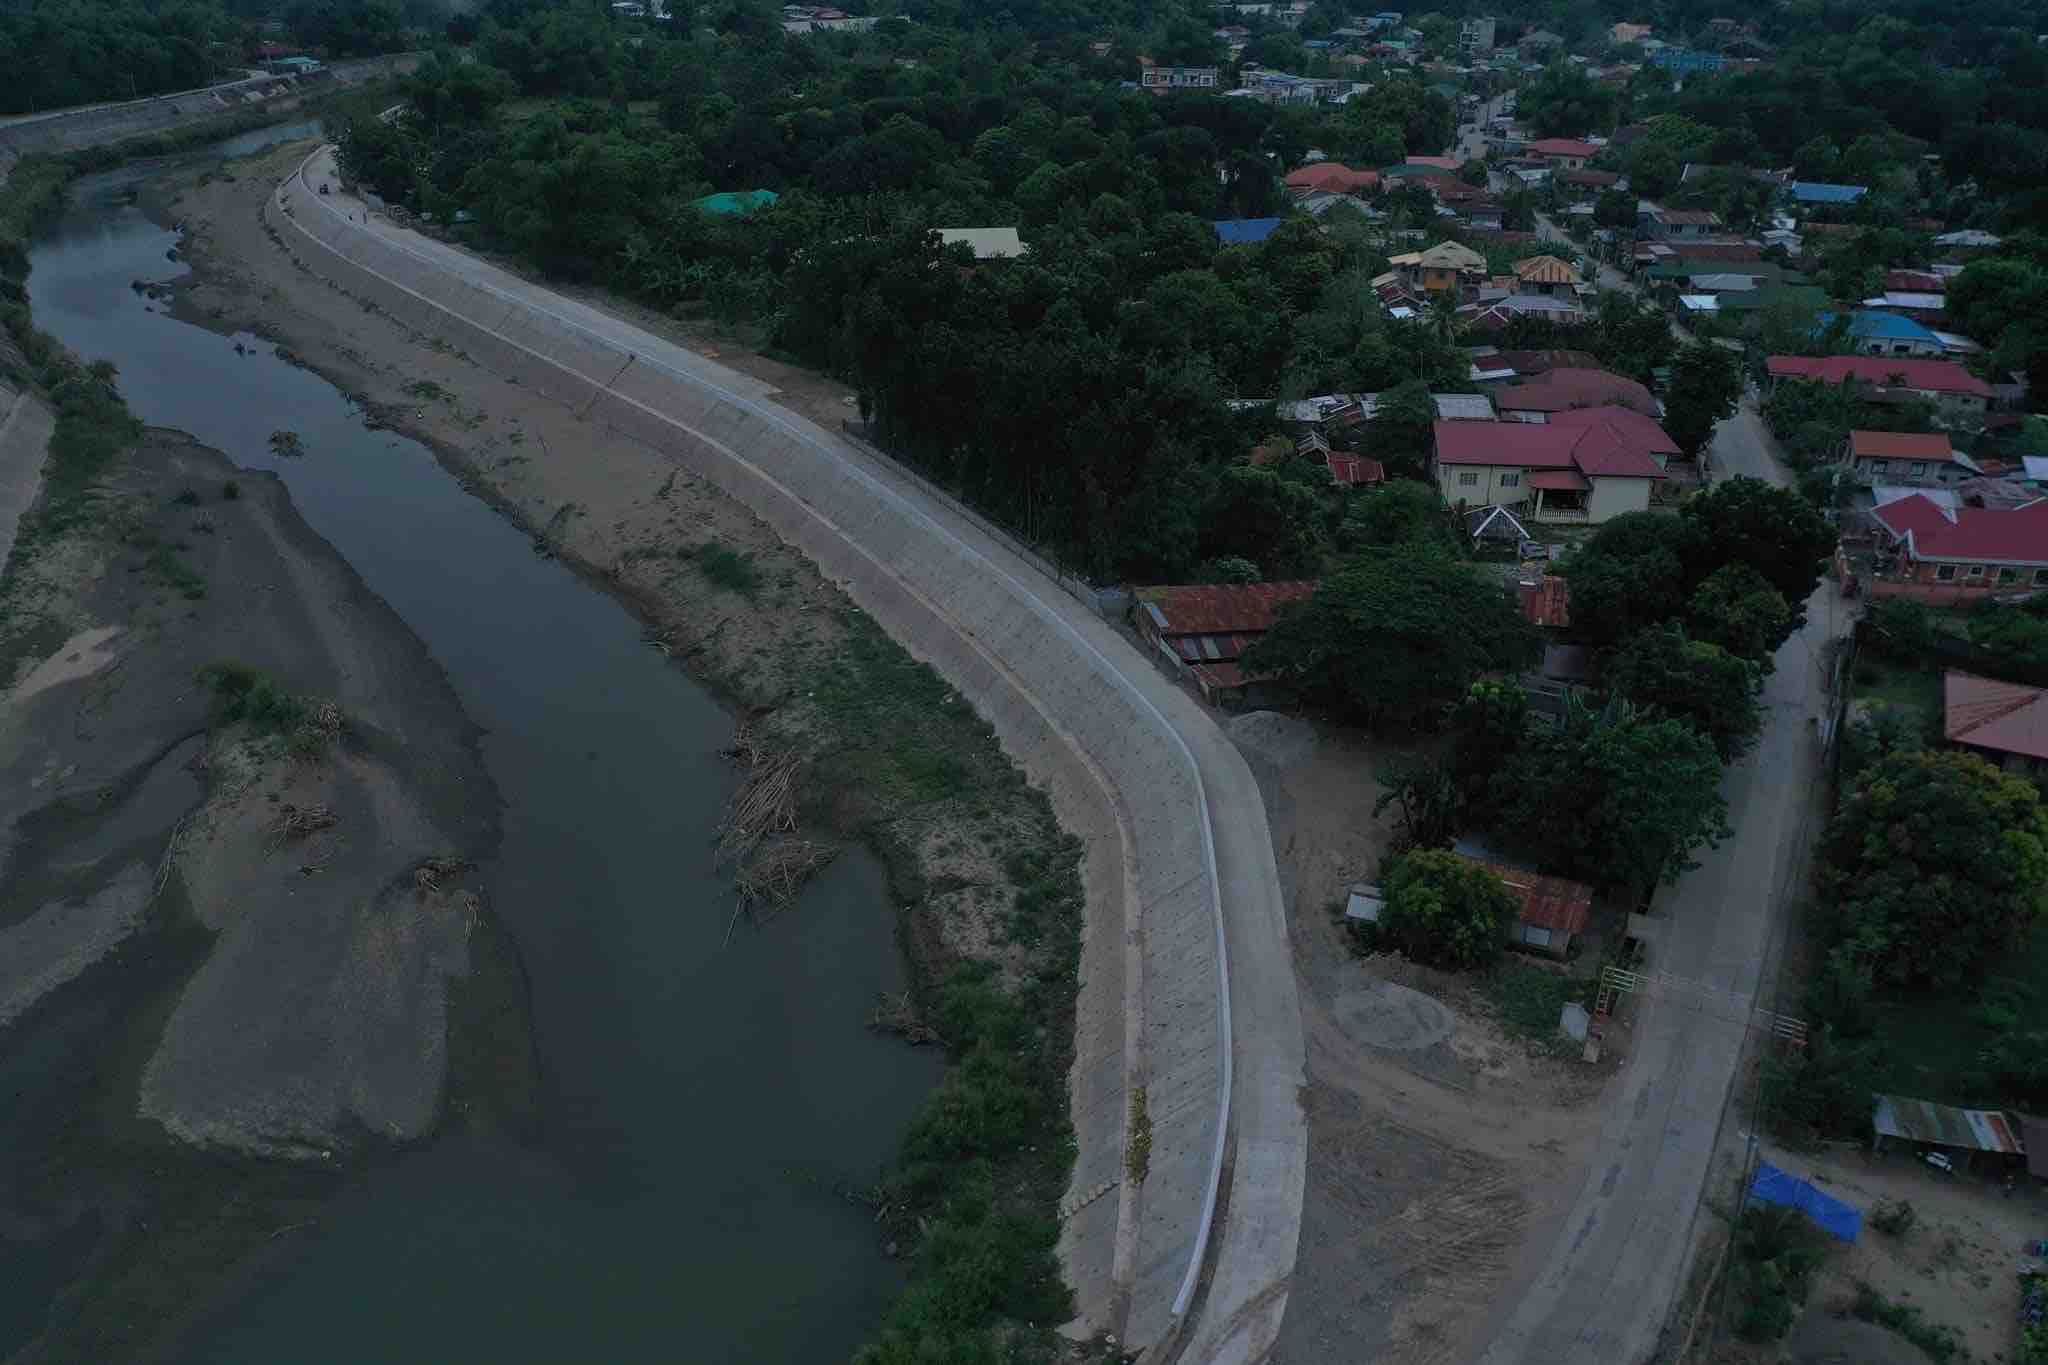 PIA DPWH Completes Flood Control Structures Along Camiling River